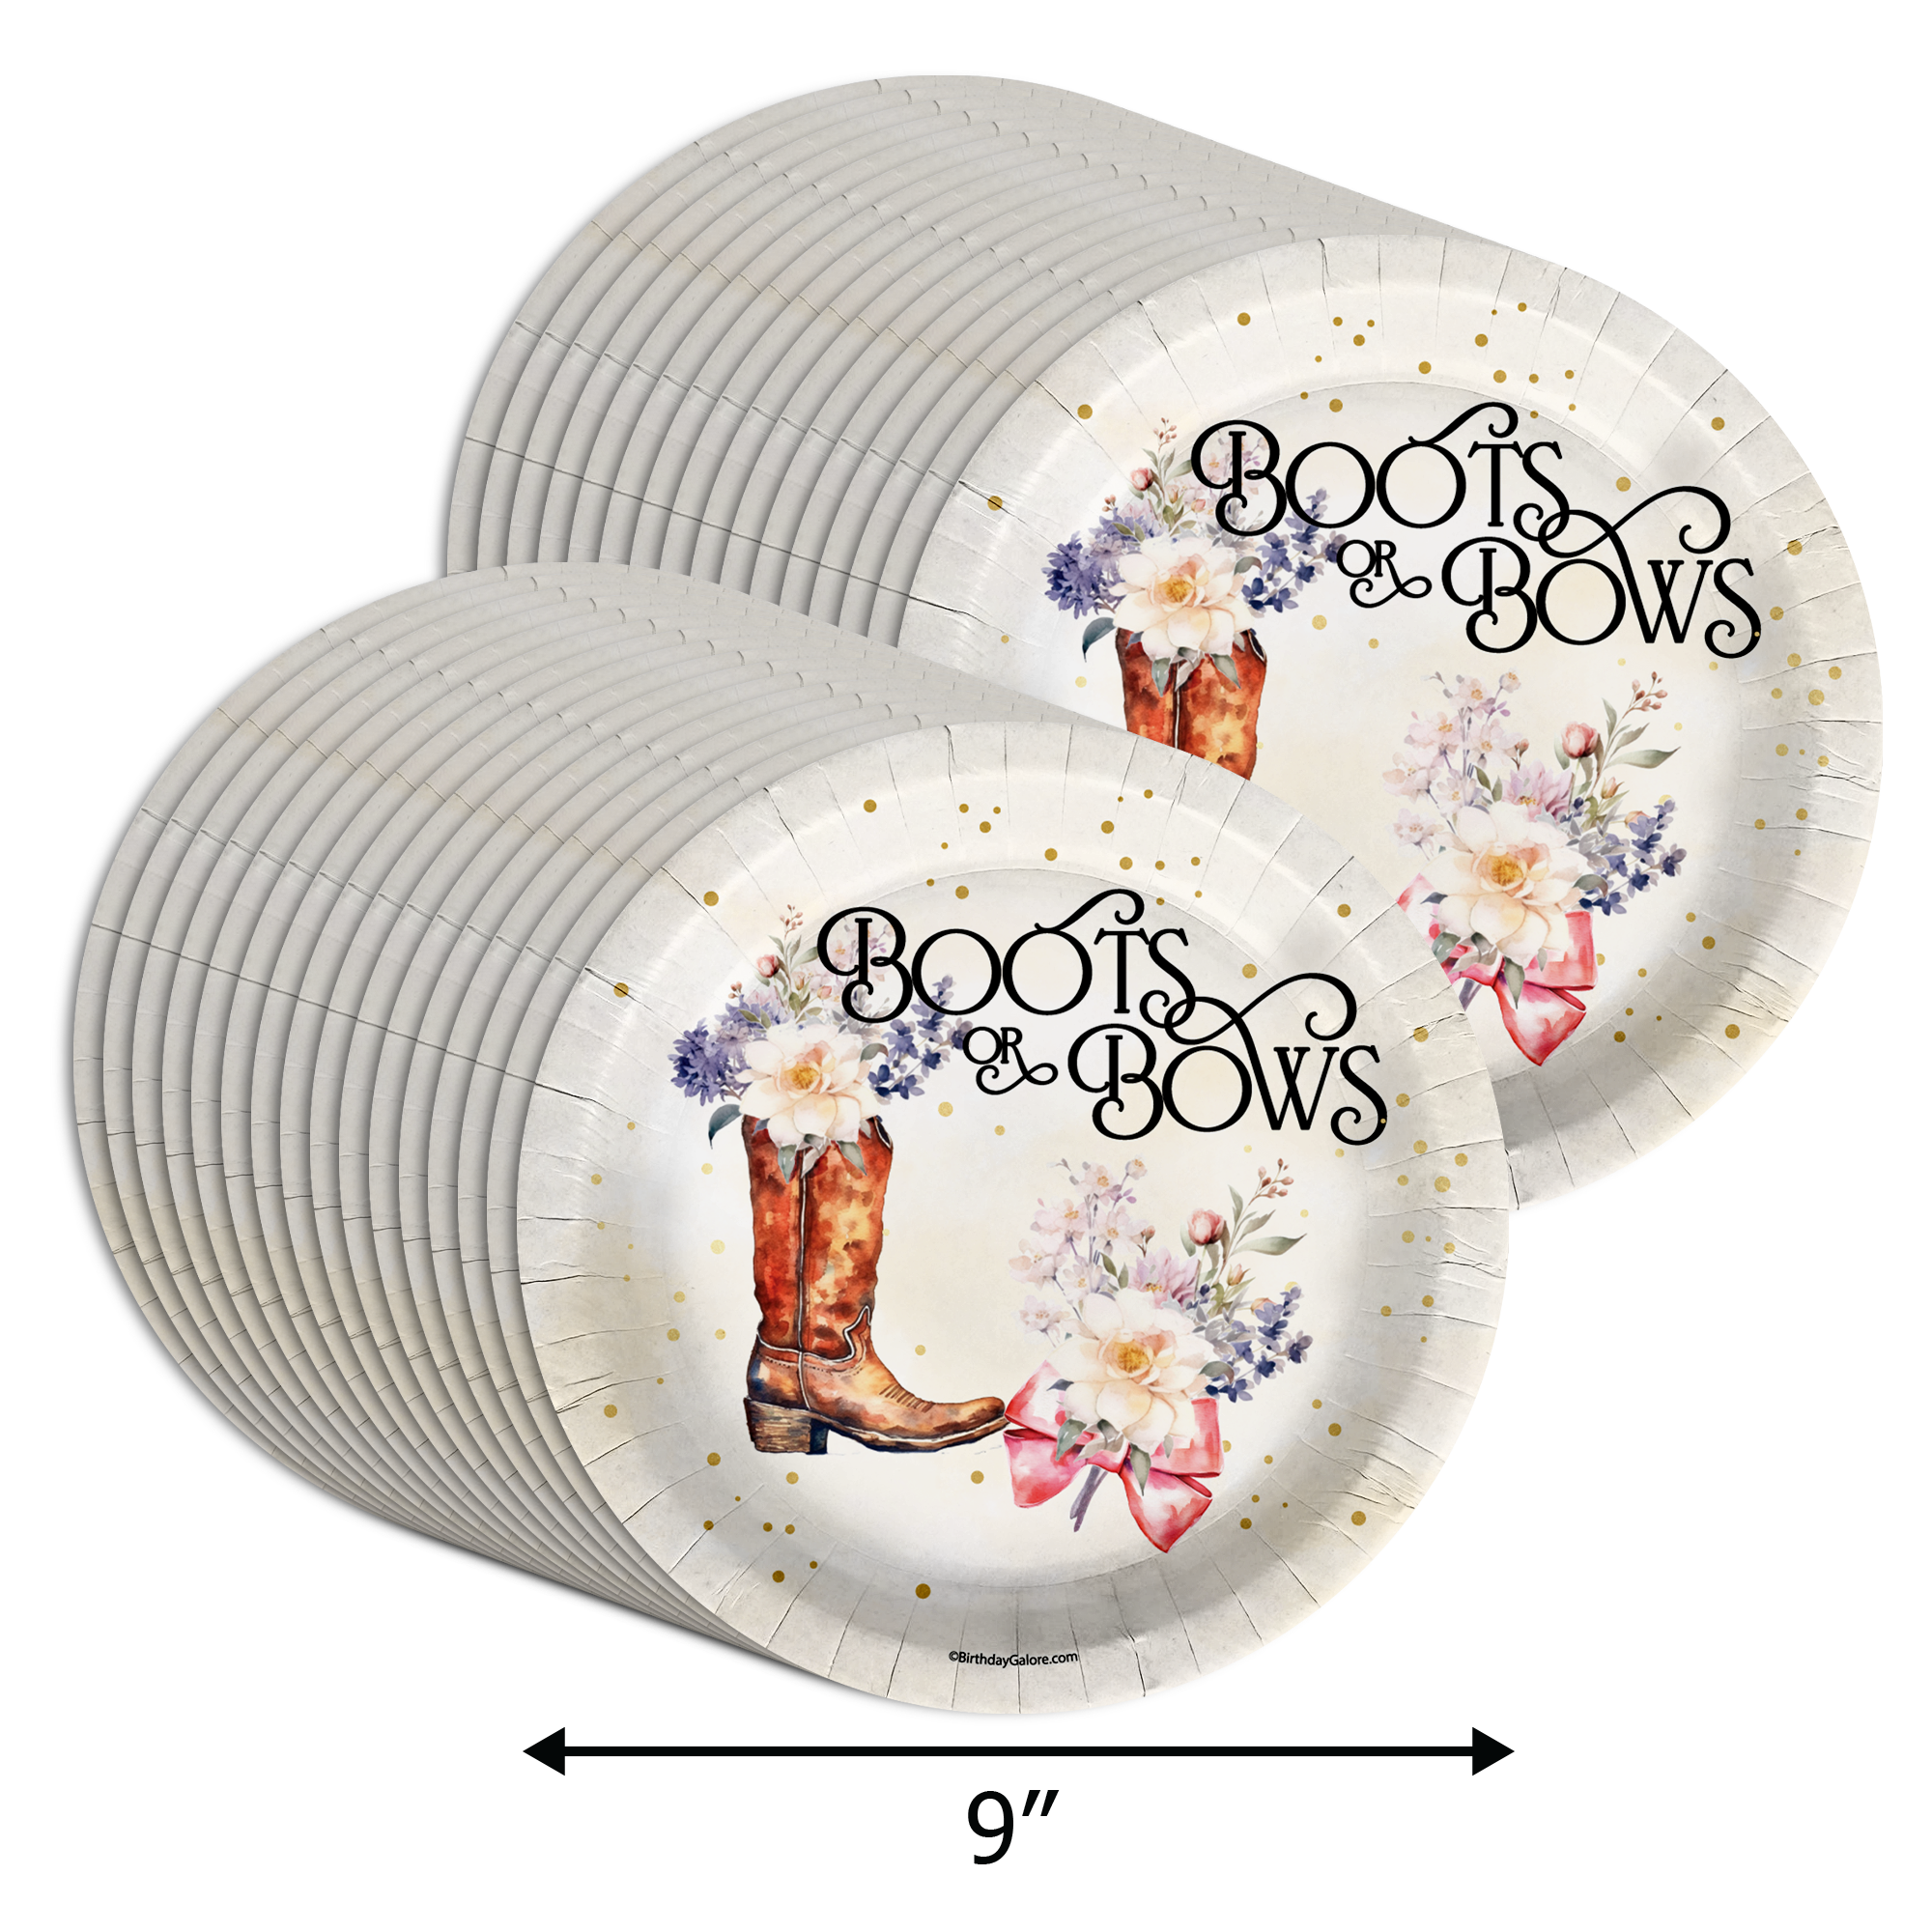 Boots or Bows Gender Reveal Party Supplies Large 9" Paper Plates in Bulk 32 Piece